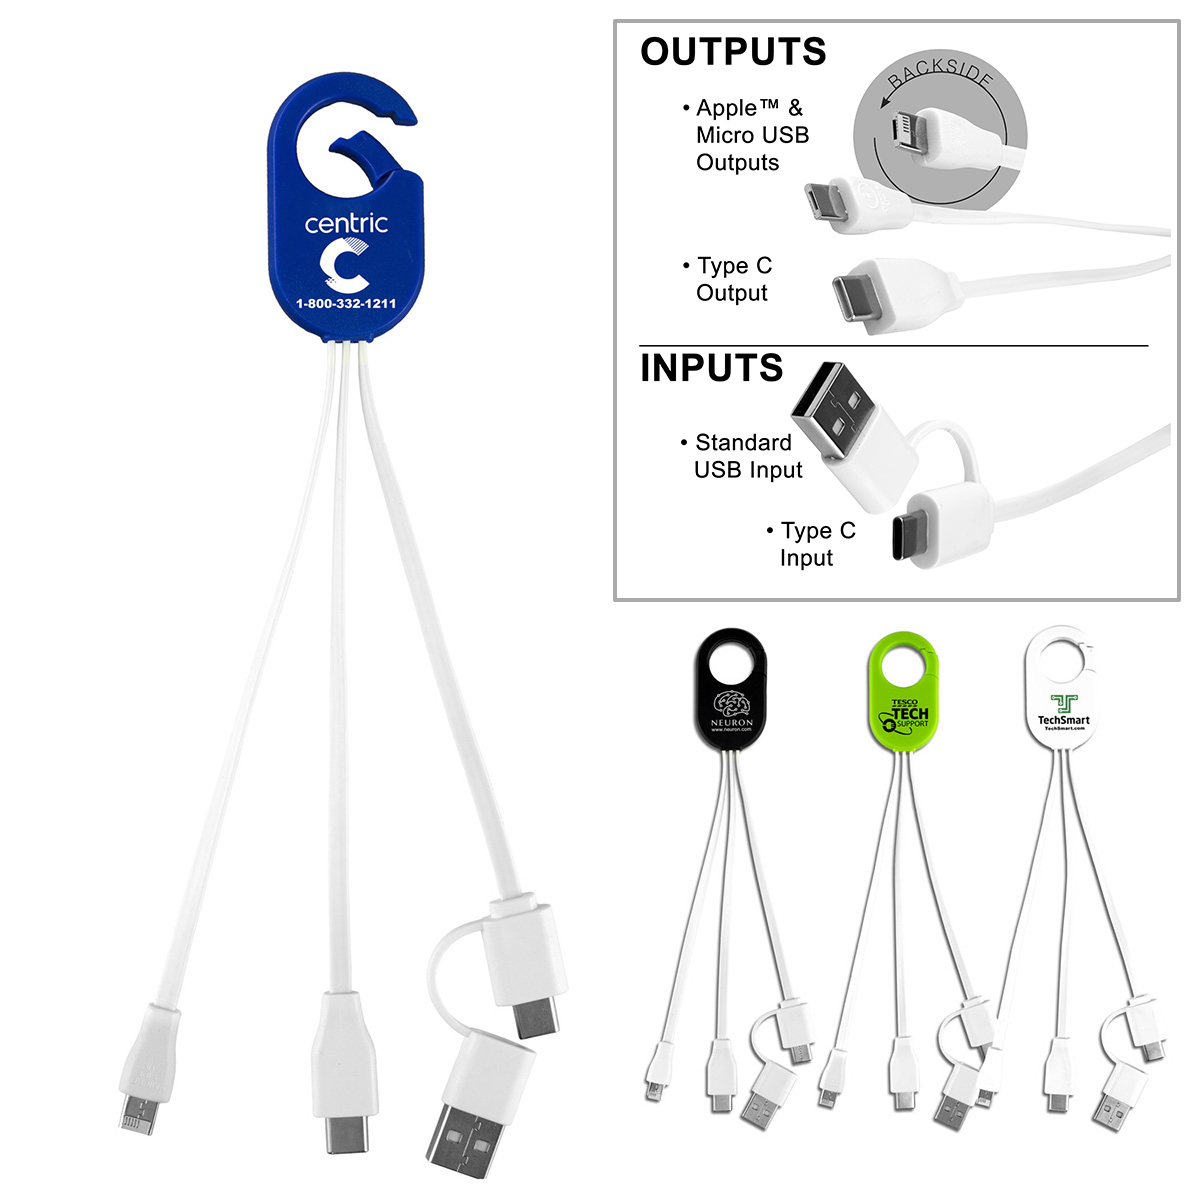 "WEBER" 3-in-1 Cell Phone Charging Cable with Type C Adapter and Carabiner Type Spring Clip 